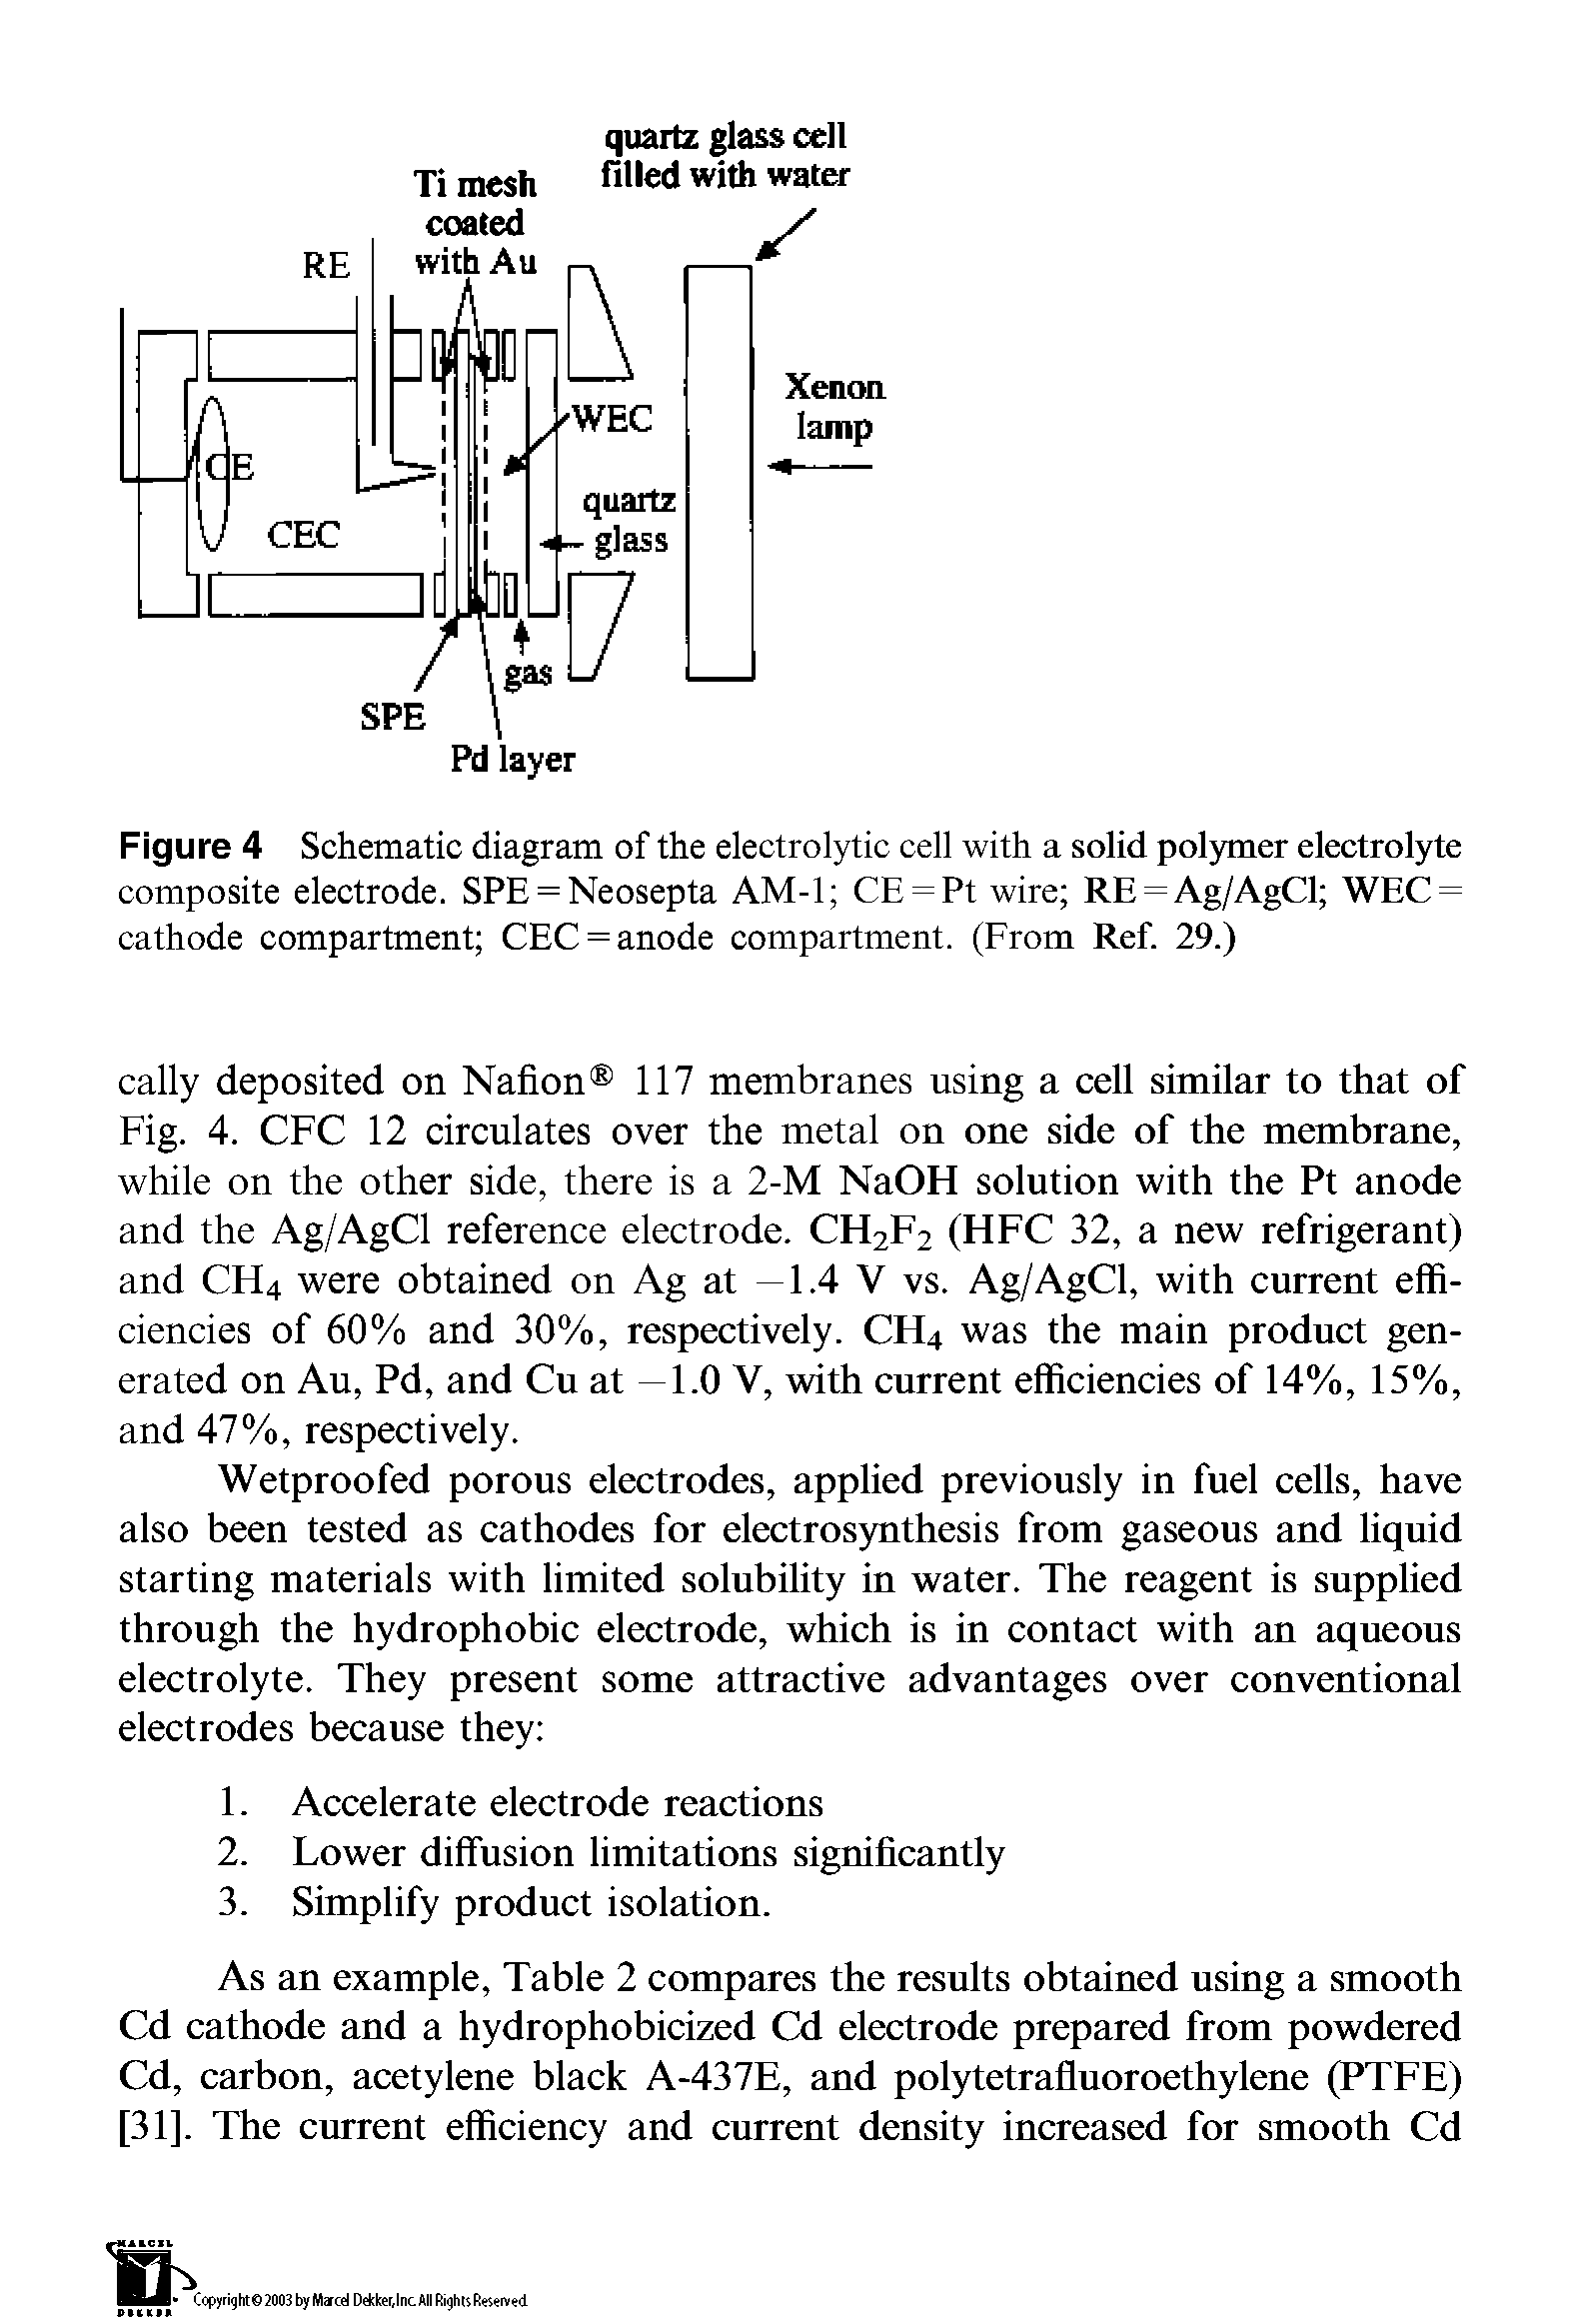 Figure 4 Schematic diagram of the electrolytic cell with a solid polymer electrolyte composite electrode. SPE = Neosepta AM-1 CE = Pt wire RE = Ag/AgCl WEC = cathode compartment CEC = anode compartment. (From Ref. 29.)...